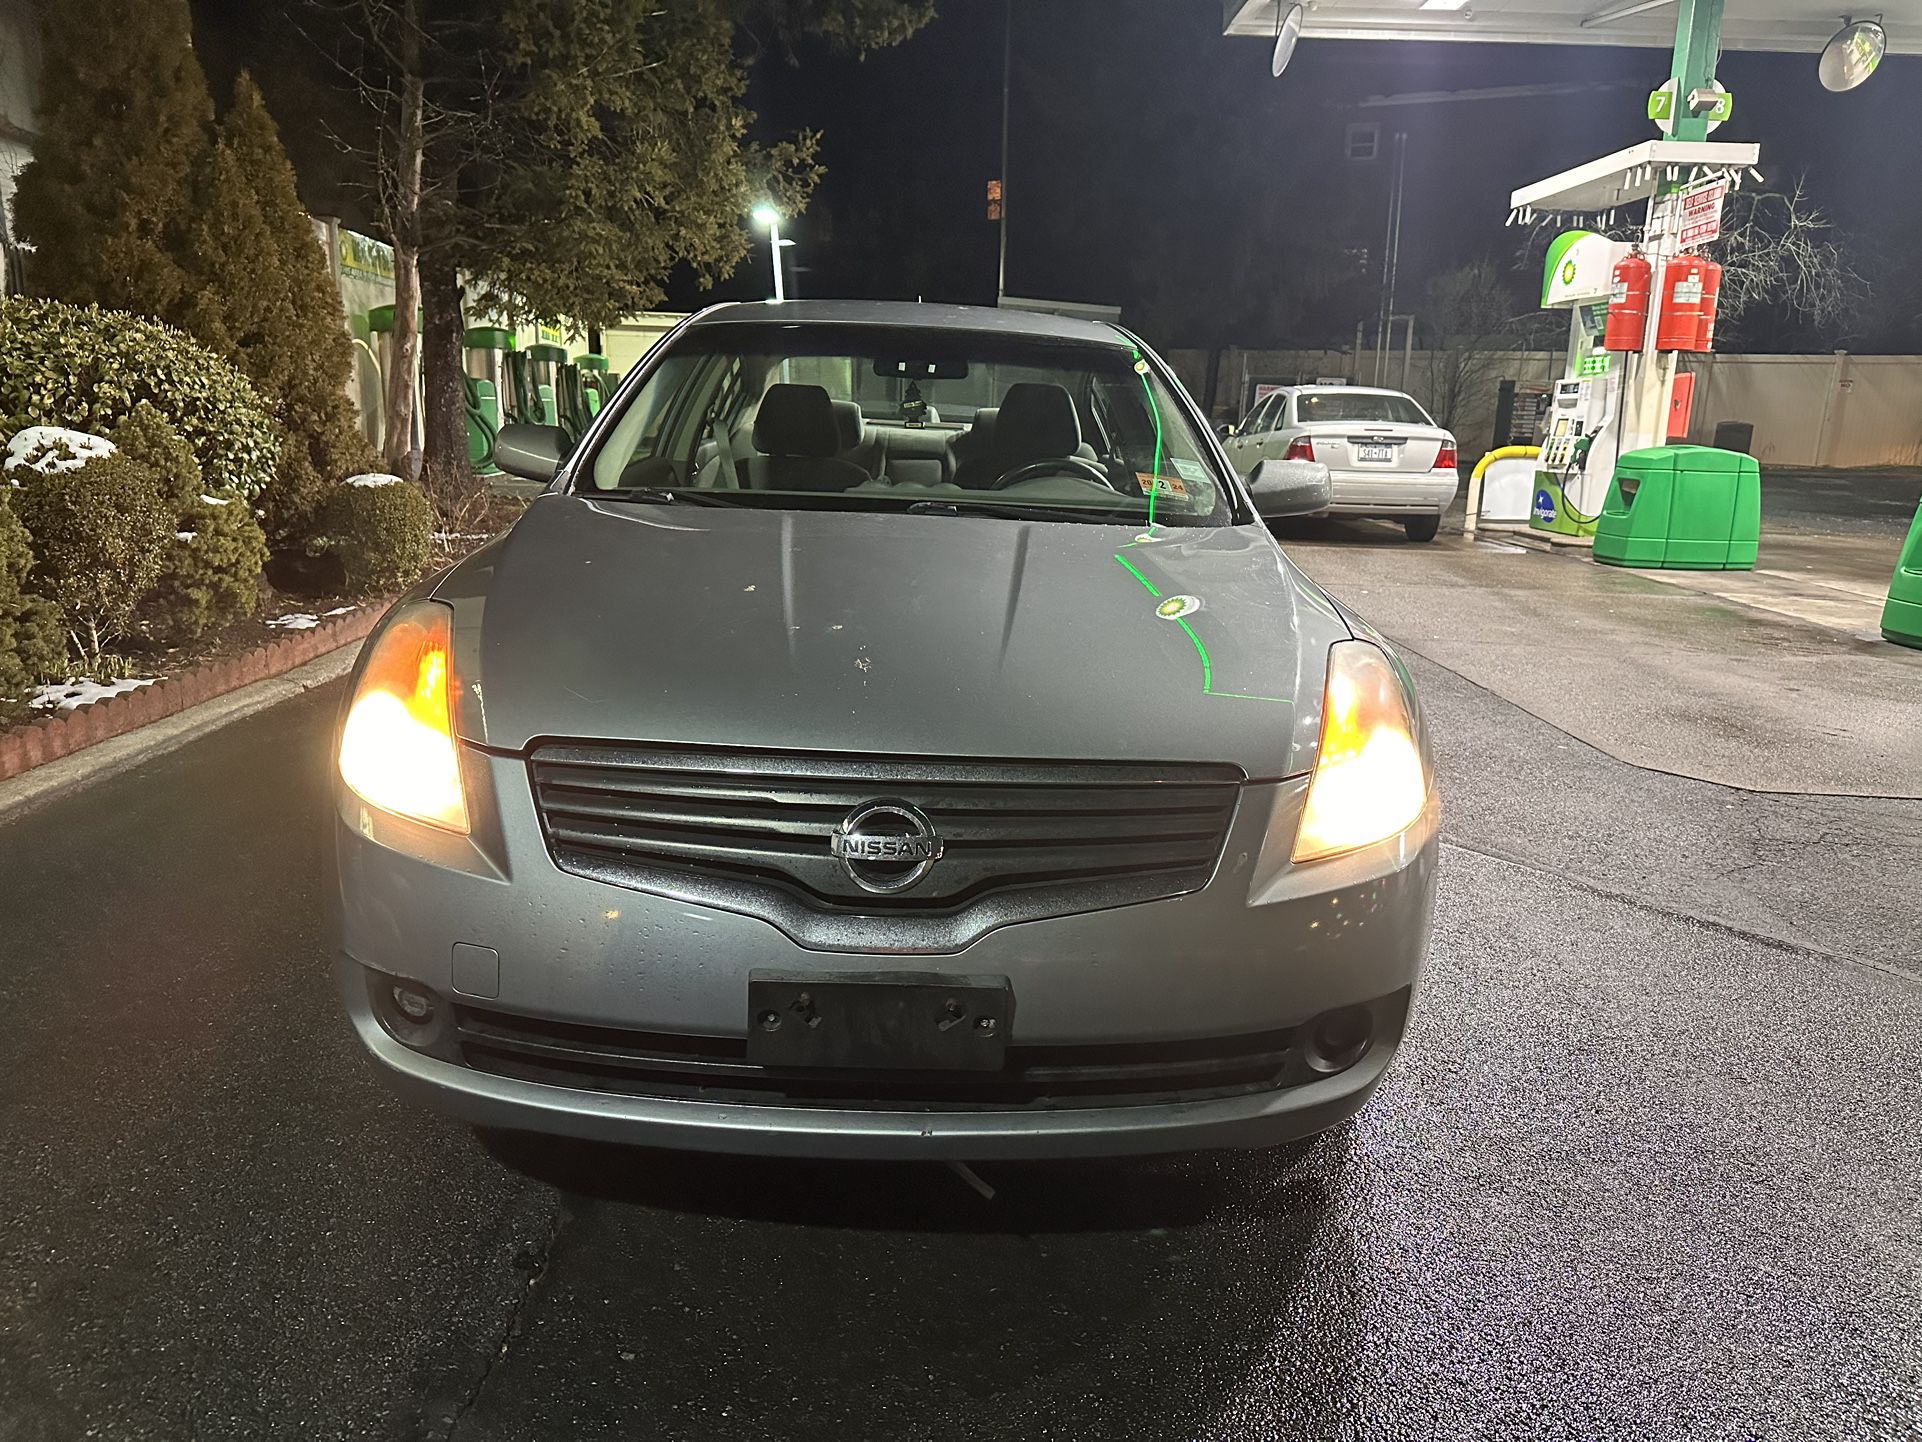 2007 Nissan Altima Hybrid for Sale in The Bronx, NY - OfferUp